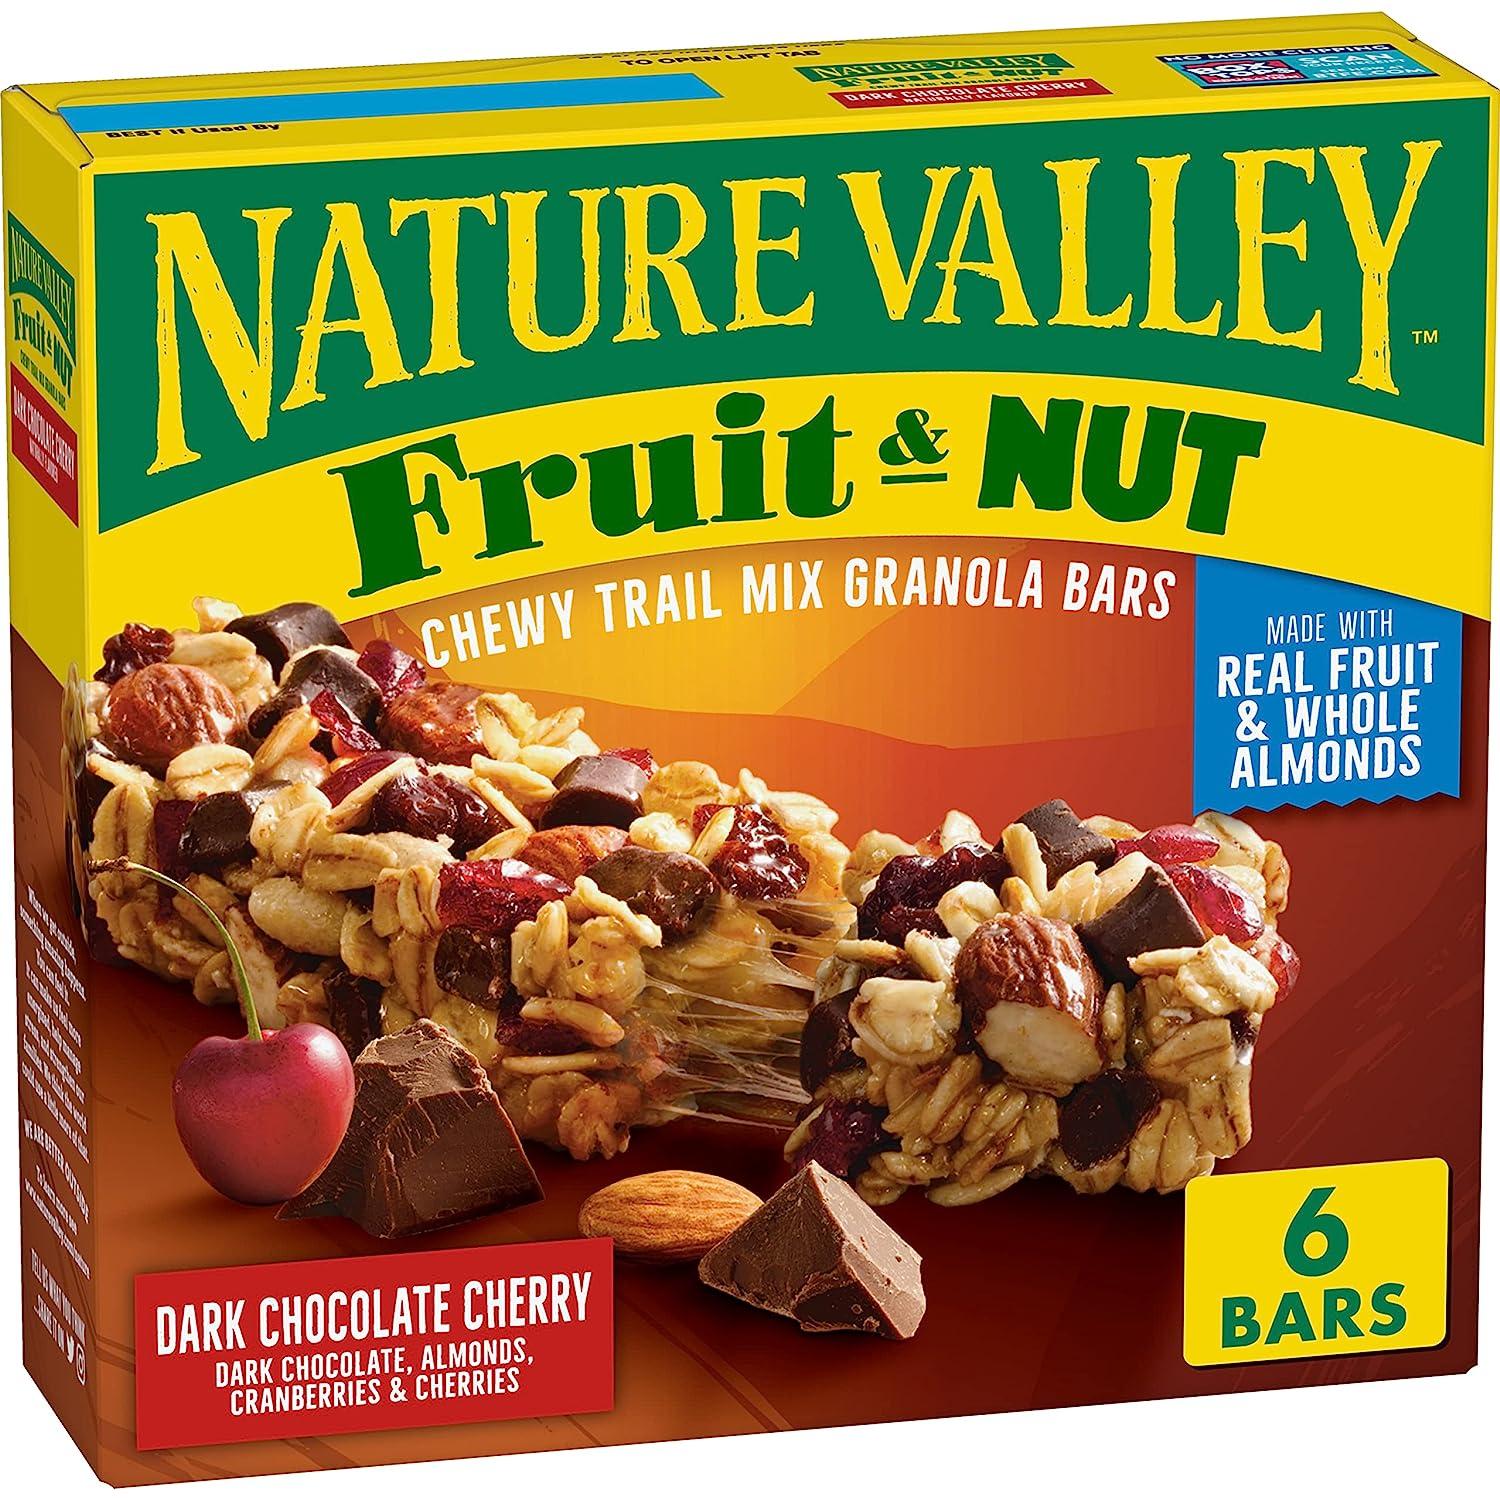 Nature Valley Fruit and Nut Granola Bars 6 Pack for $1.99 Shipped